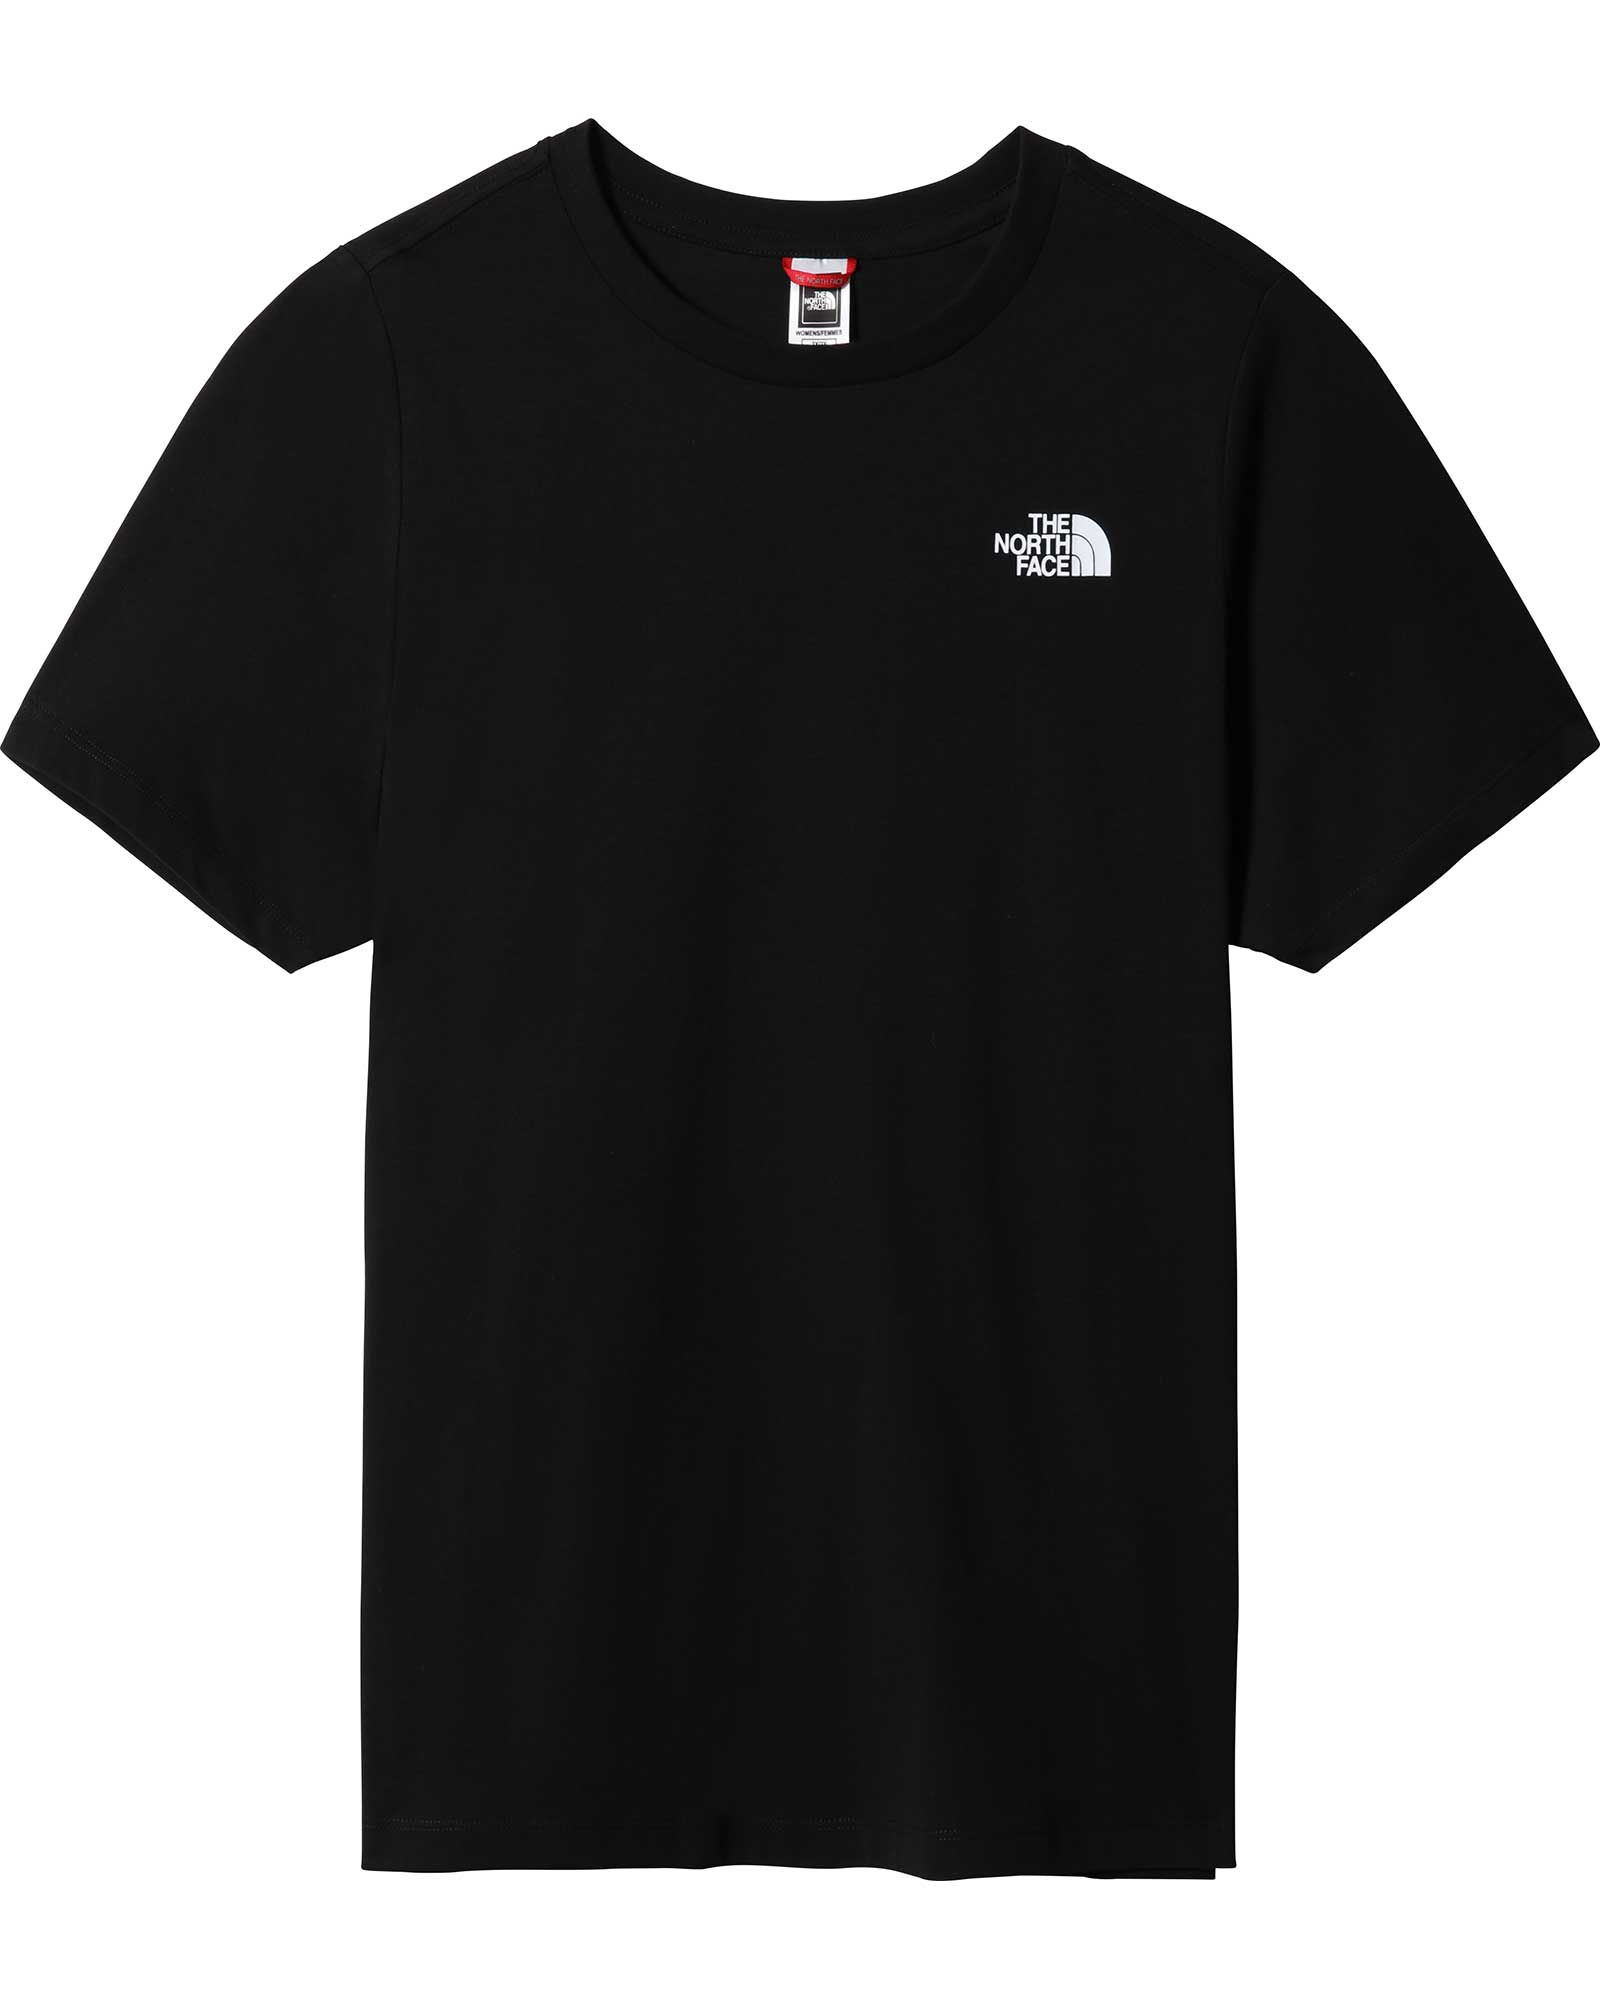 The North Face Plus Simple Dome Women’s T Shirt - TNF Black 3X